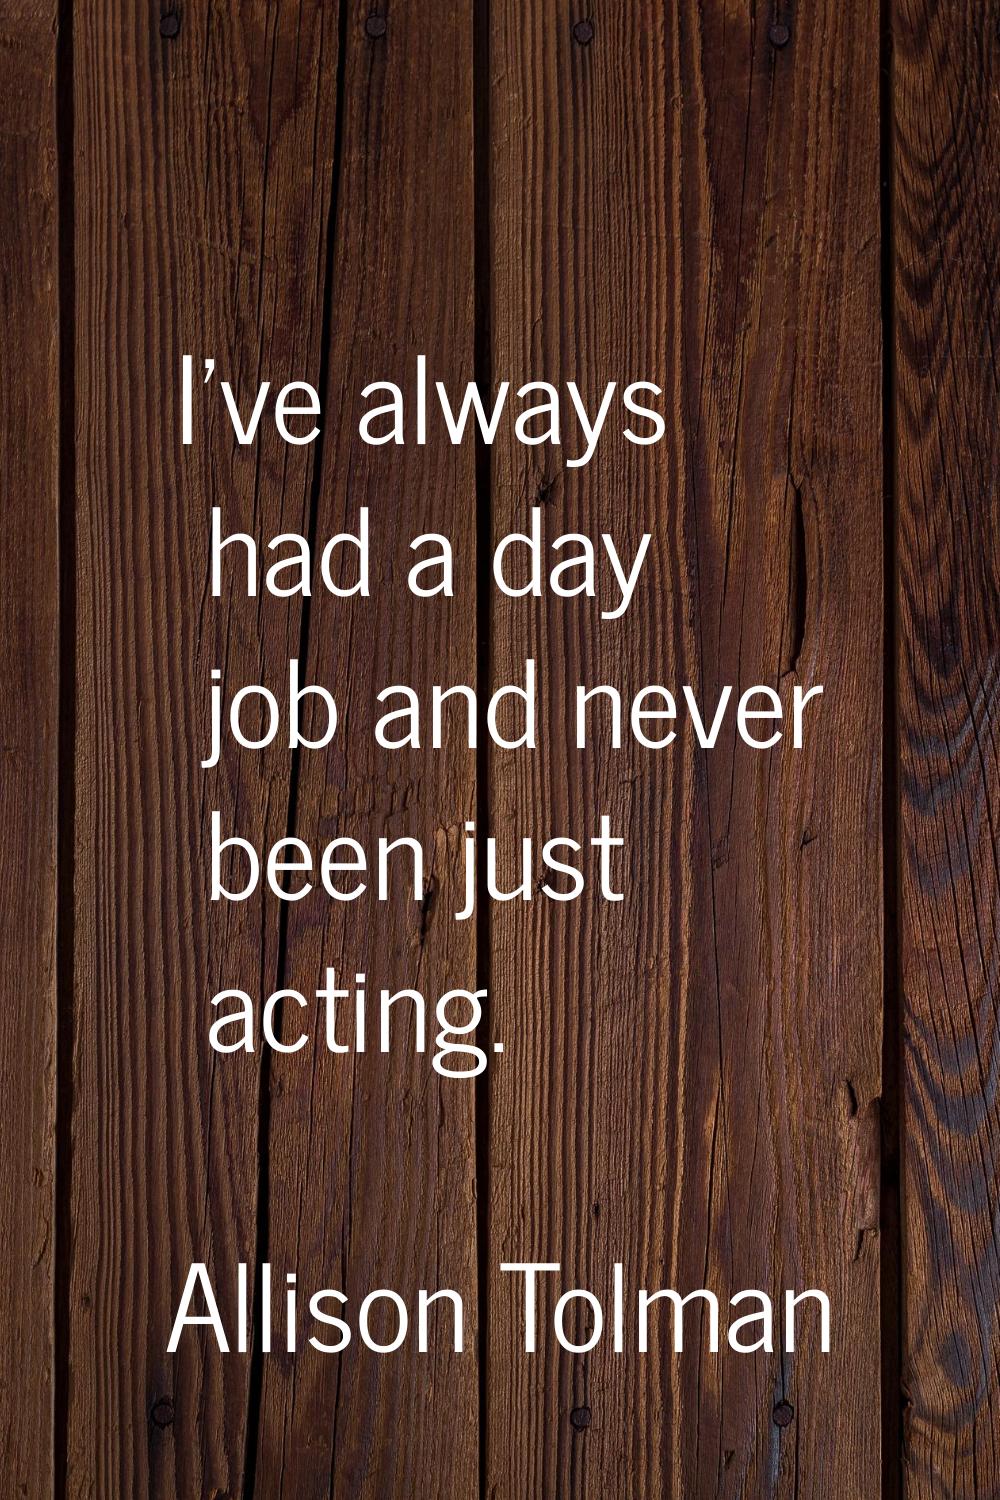 I've always had a day job and never been just acting.